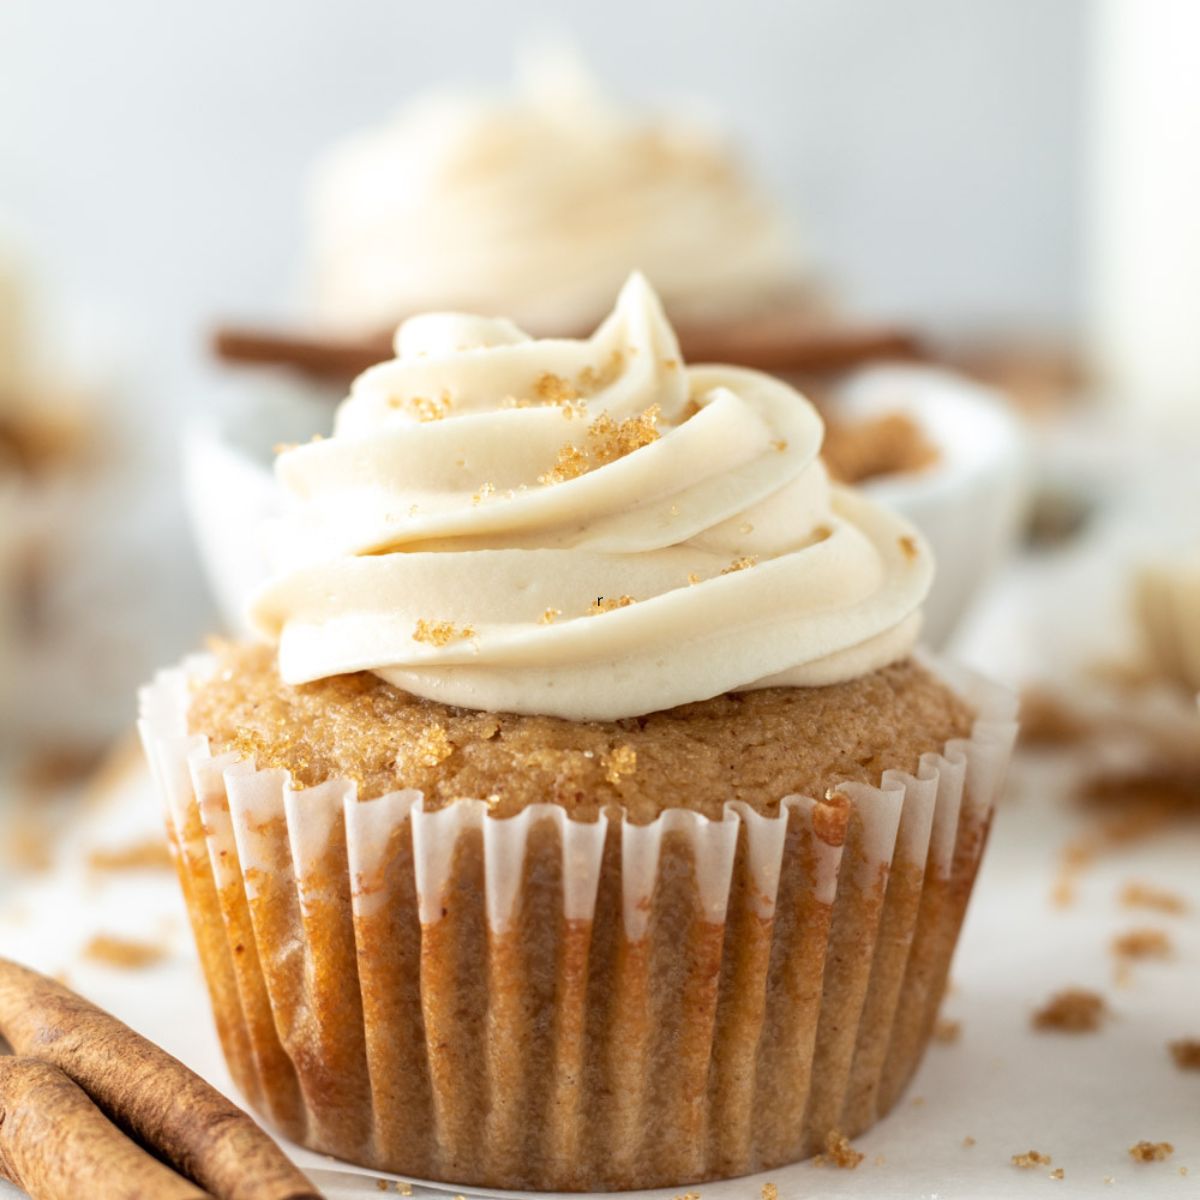 A cupcake topped with a swirl of frosting sprinkled with brown sugar.